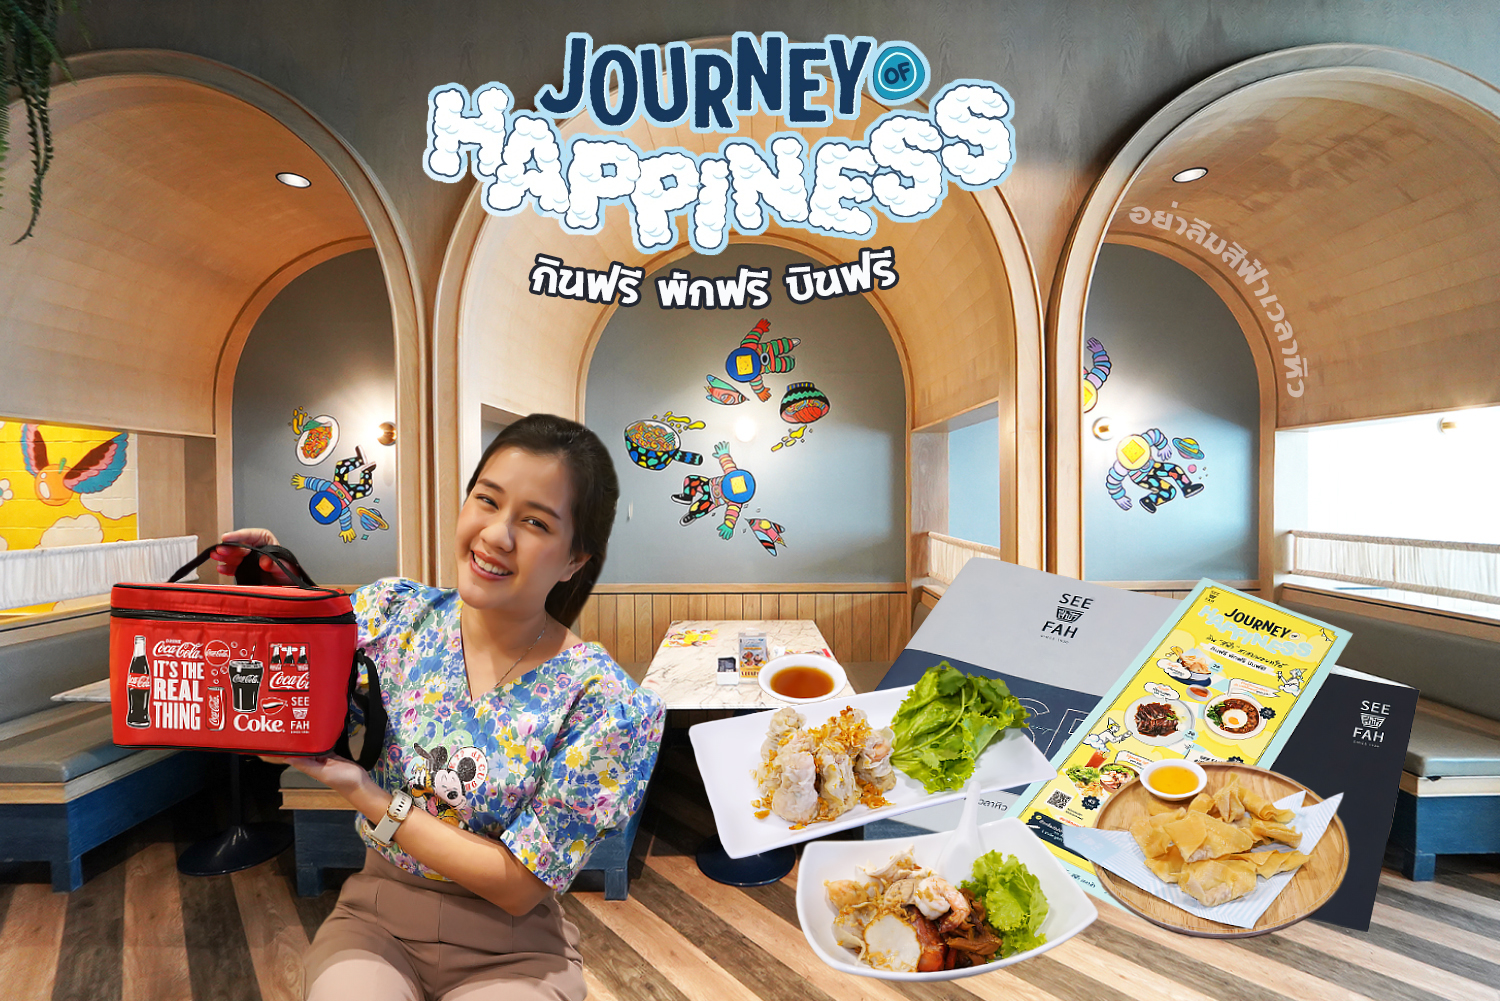 SEE FAH JOURNEY HAPPINESS 0